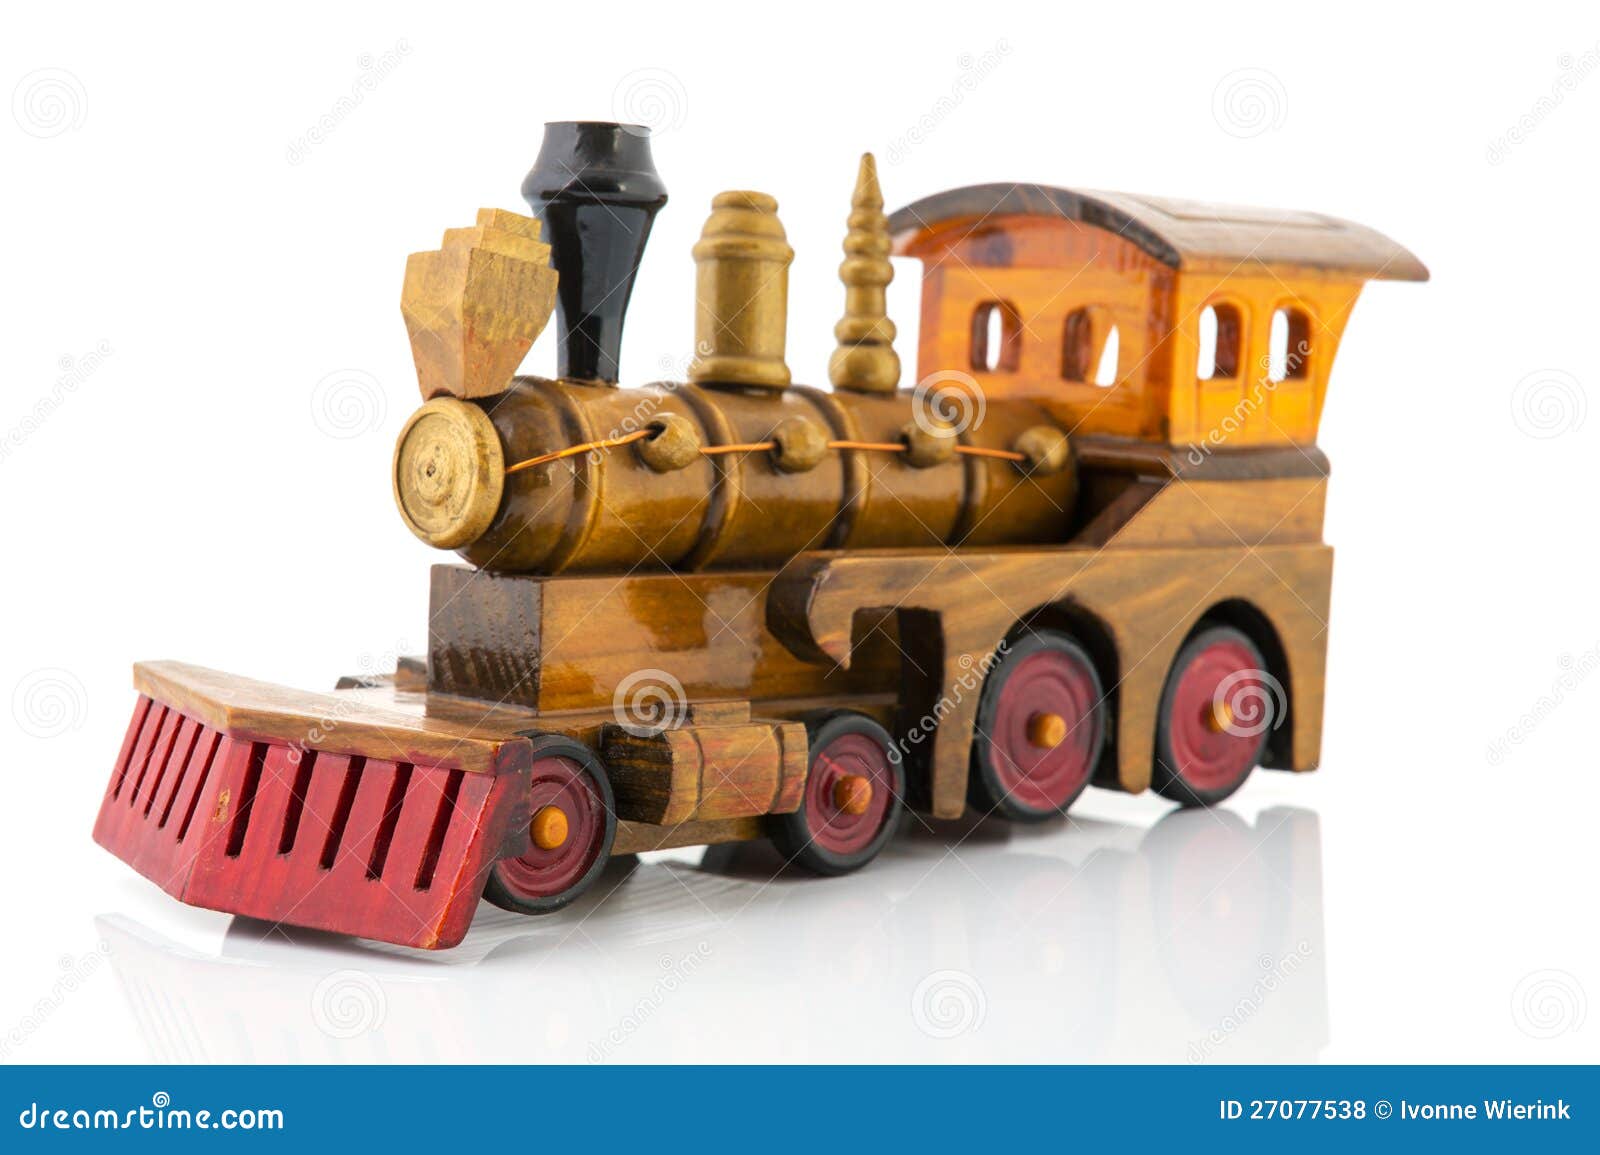 Wooden Toy Train Royalty Free Stock Photos - Image: 27077538